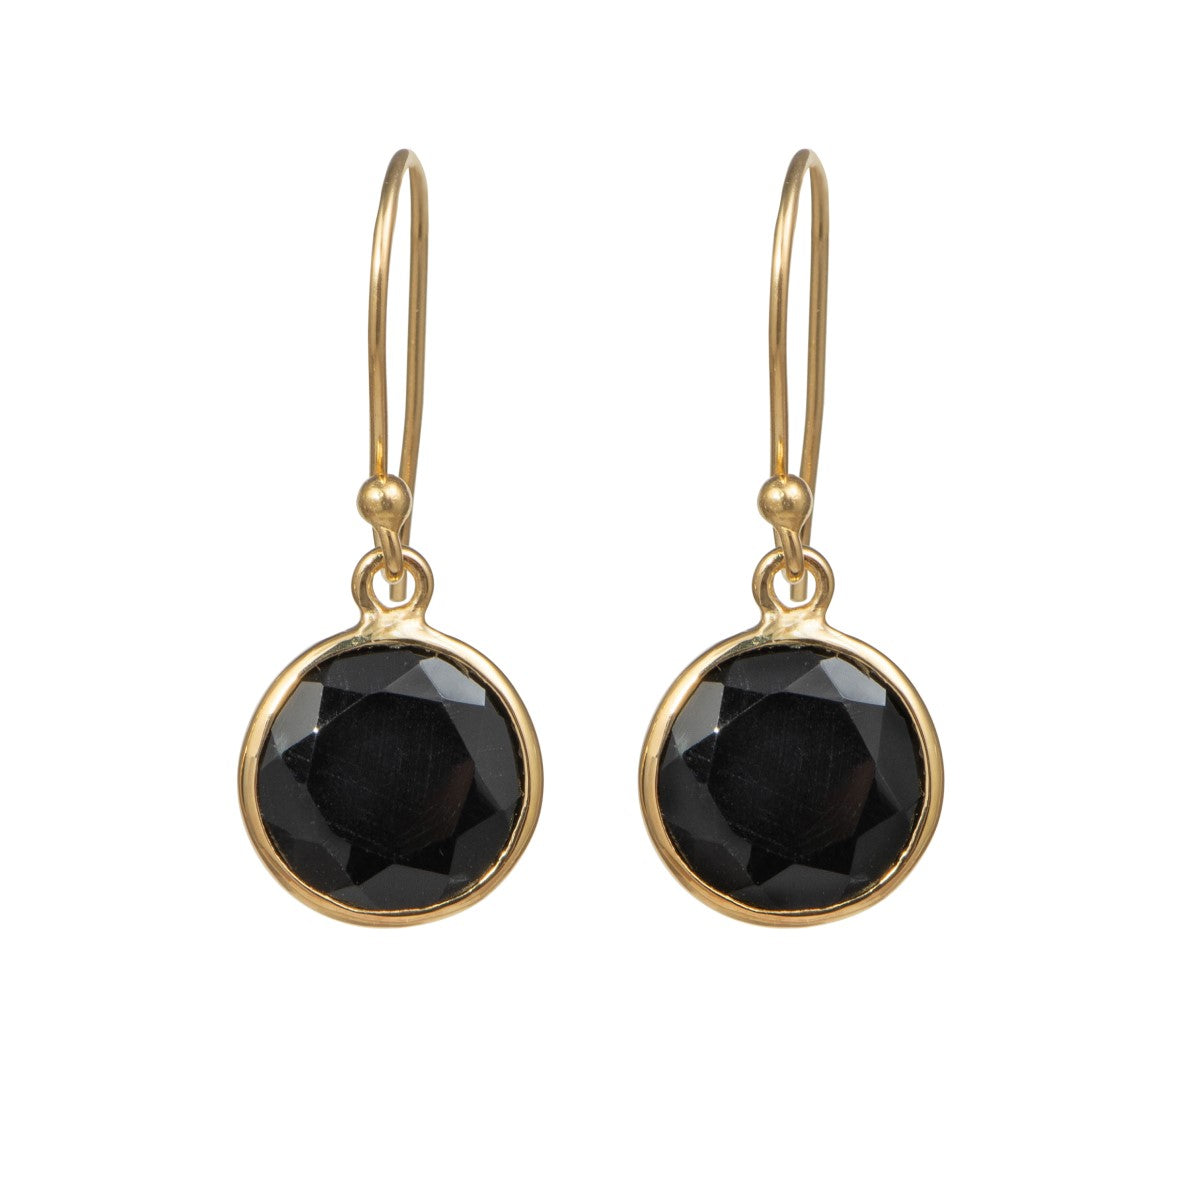 Black Onyx Gold Plated Sterling Silver Earrings with a Round Faceted Gemstone Drop